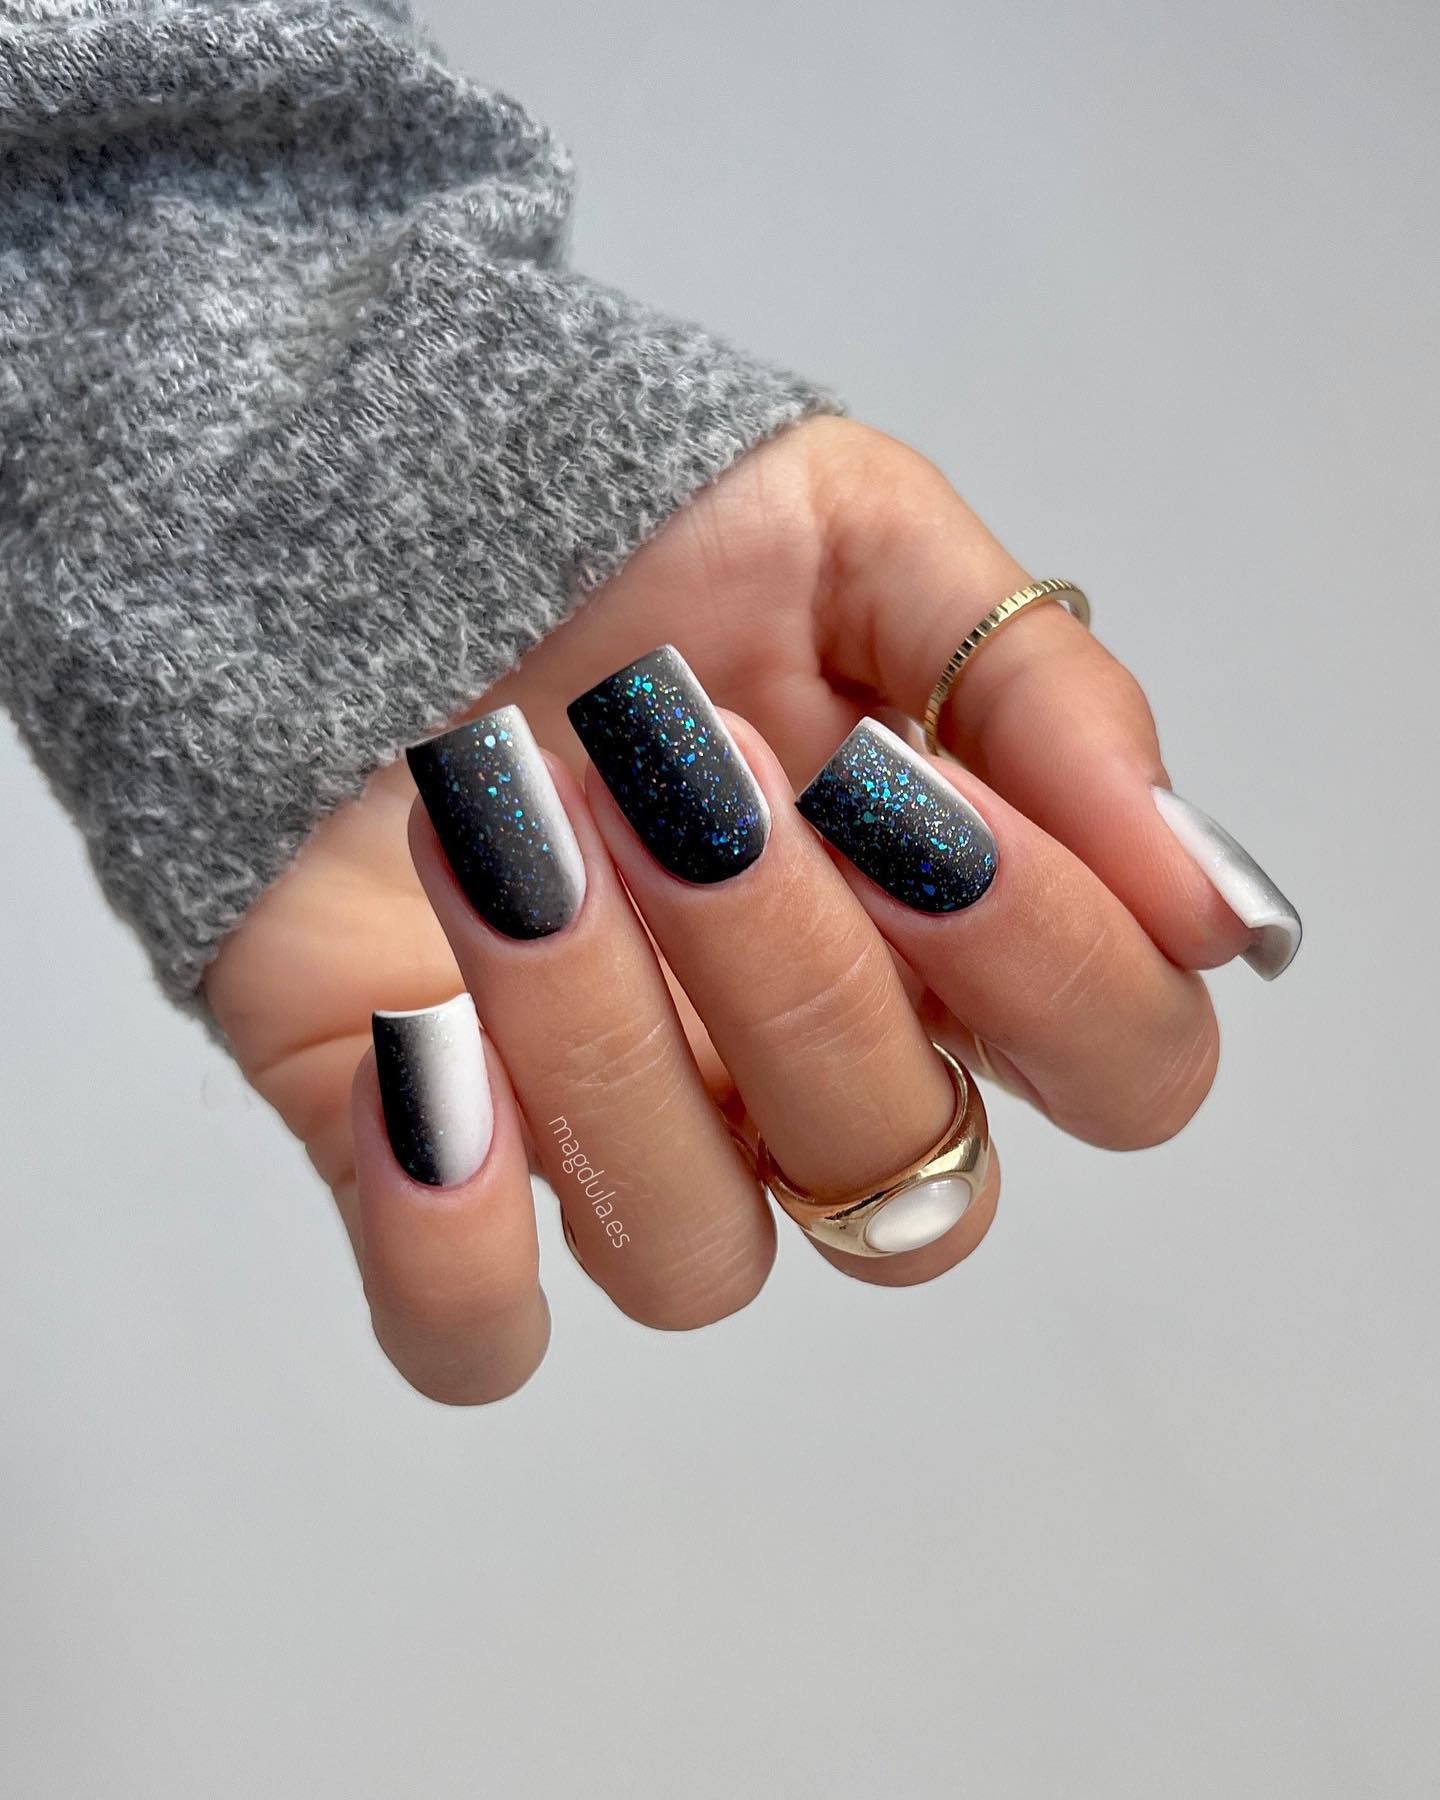 Glamour in Black: 10+ New Inspiring Nail Designs That Are Black But Not Goth